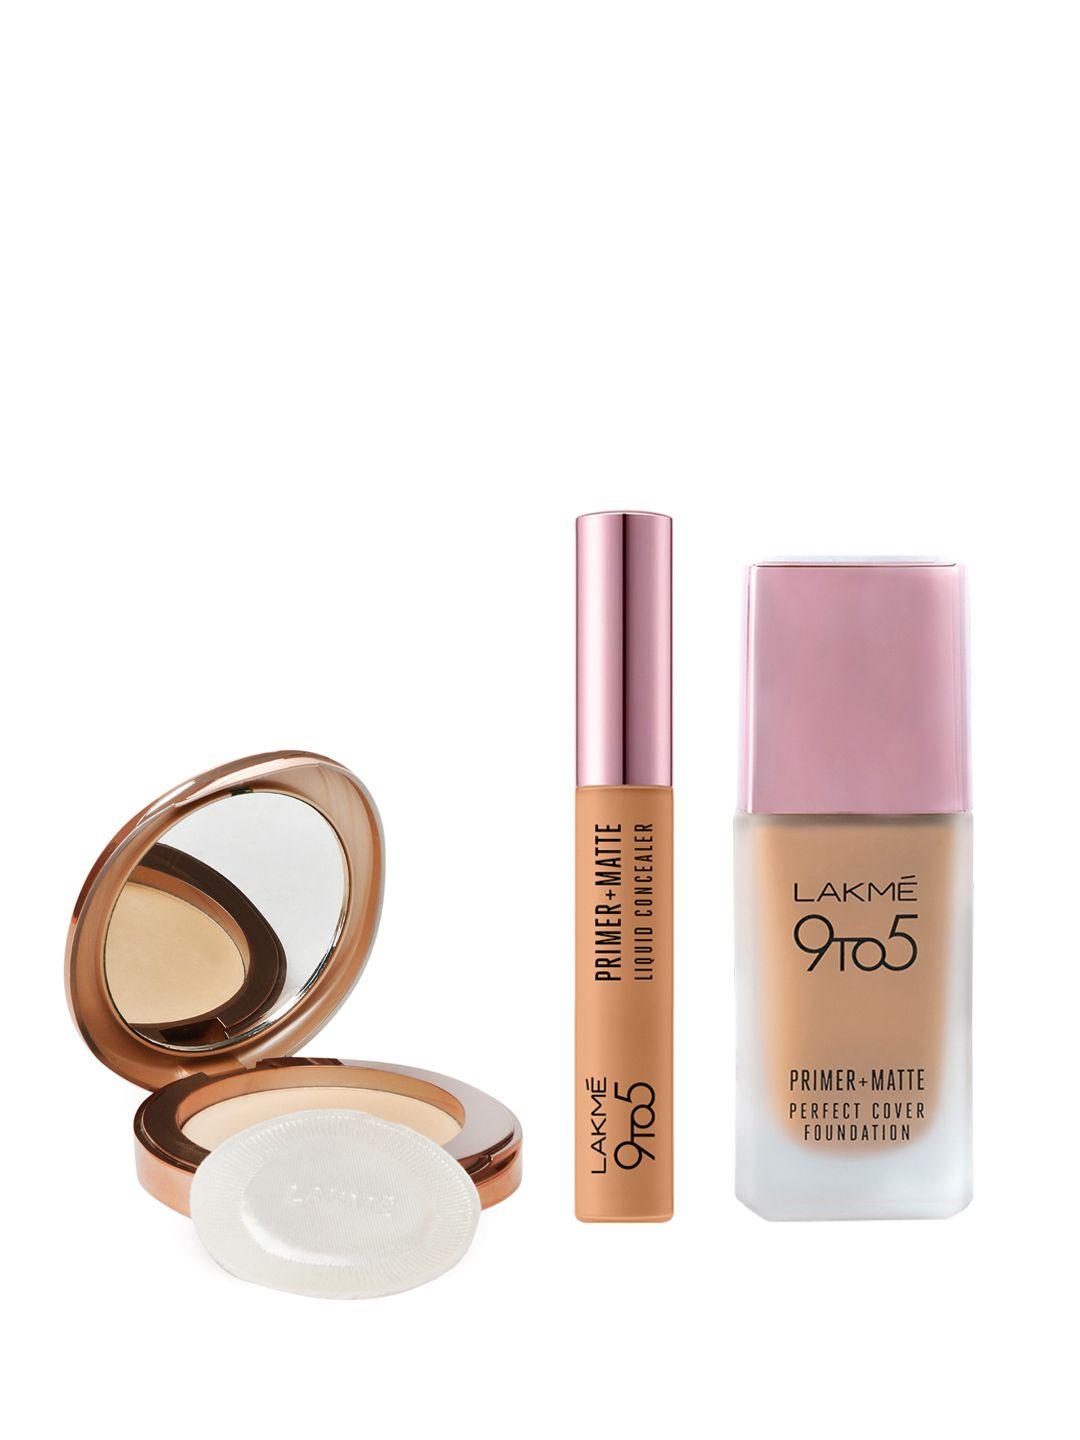 lakme set of 9to5 primer+matte concealer & foundation with flawless matte compact